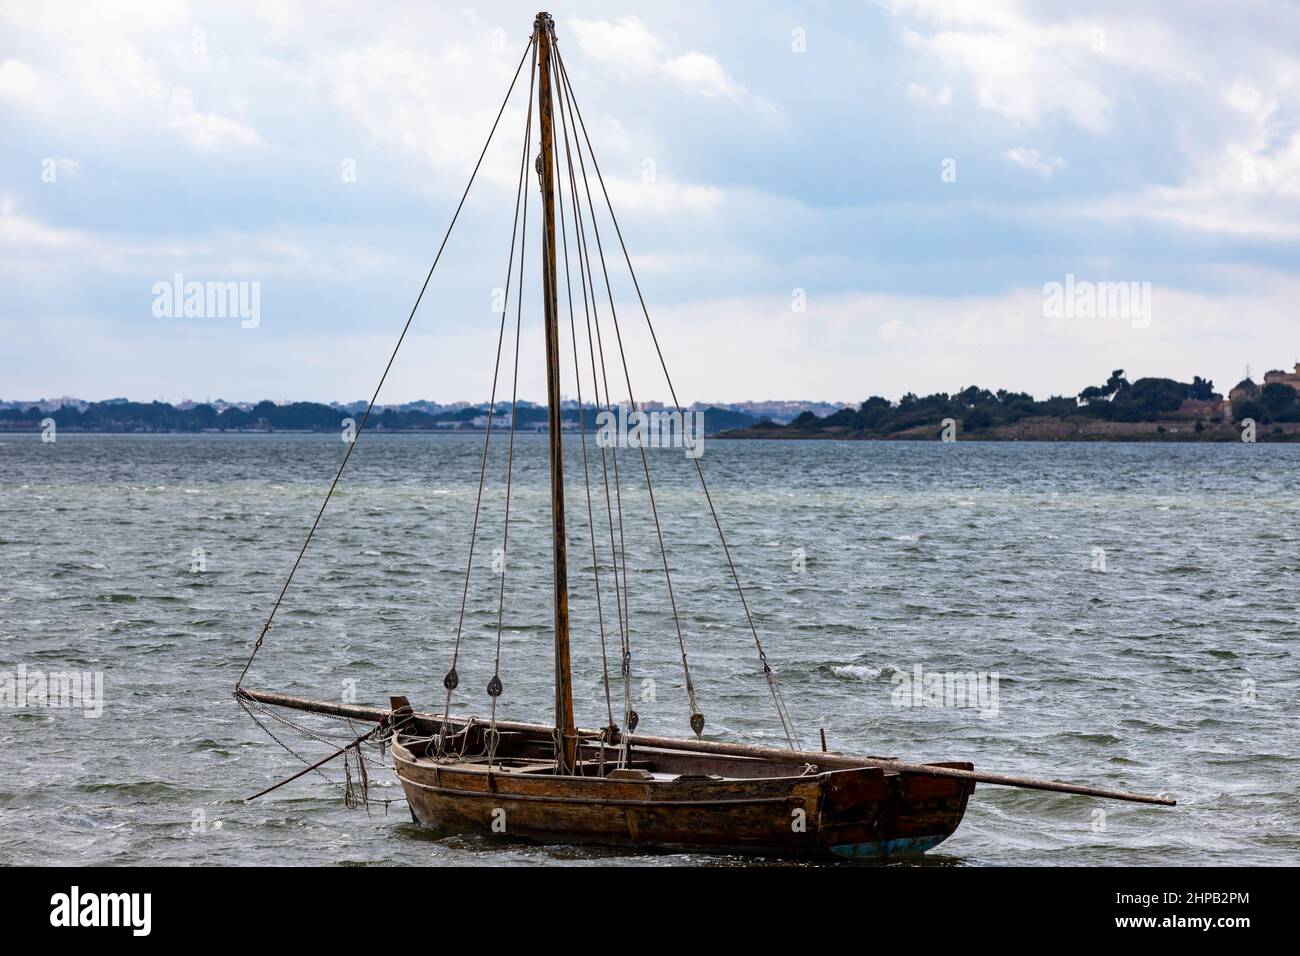 traditional mediterranean wooden sailboat anchored without sails mounted Stock Photo